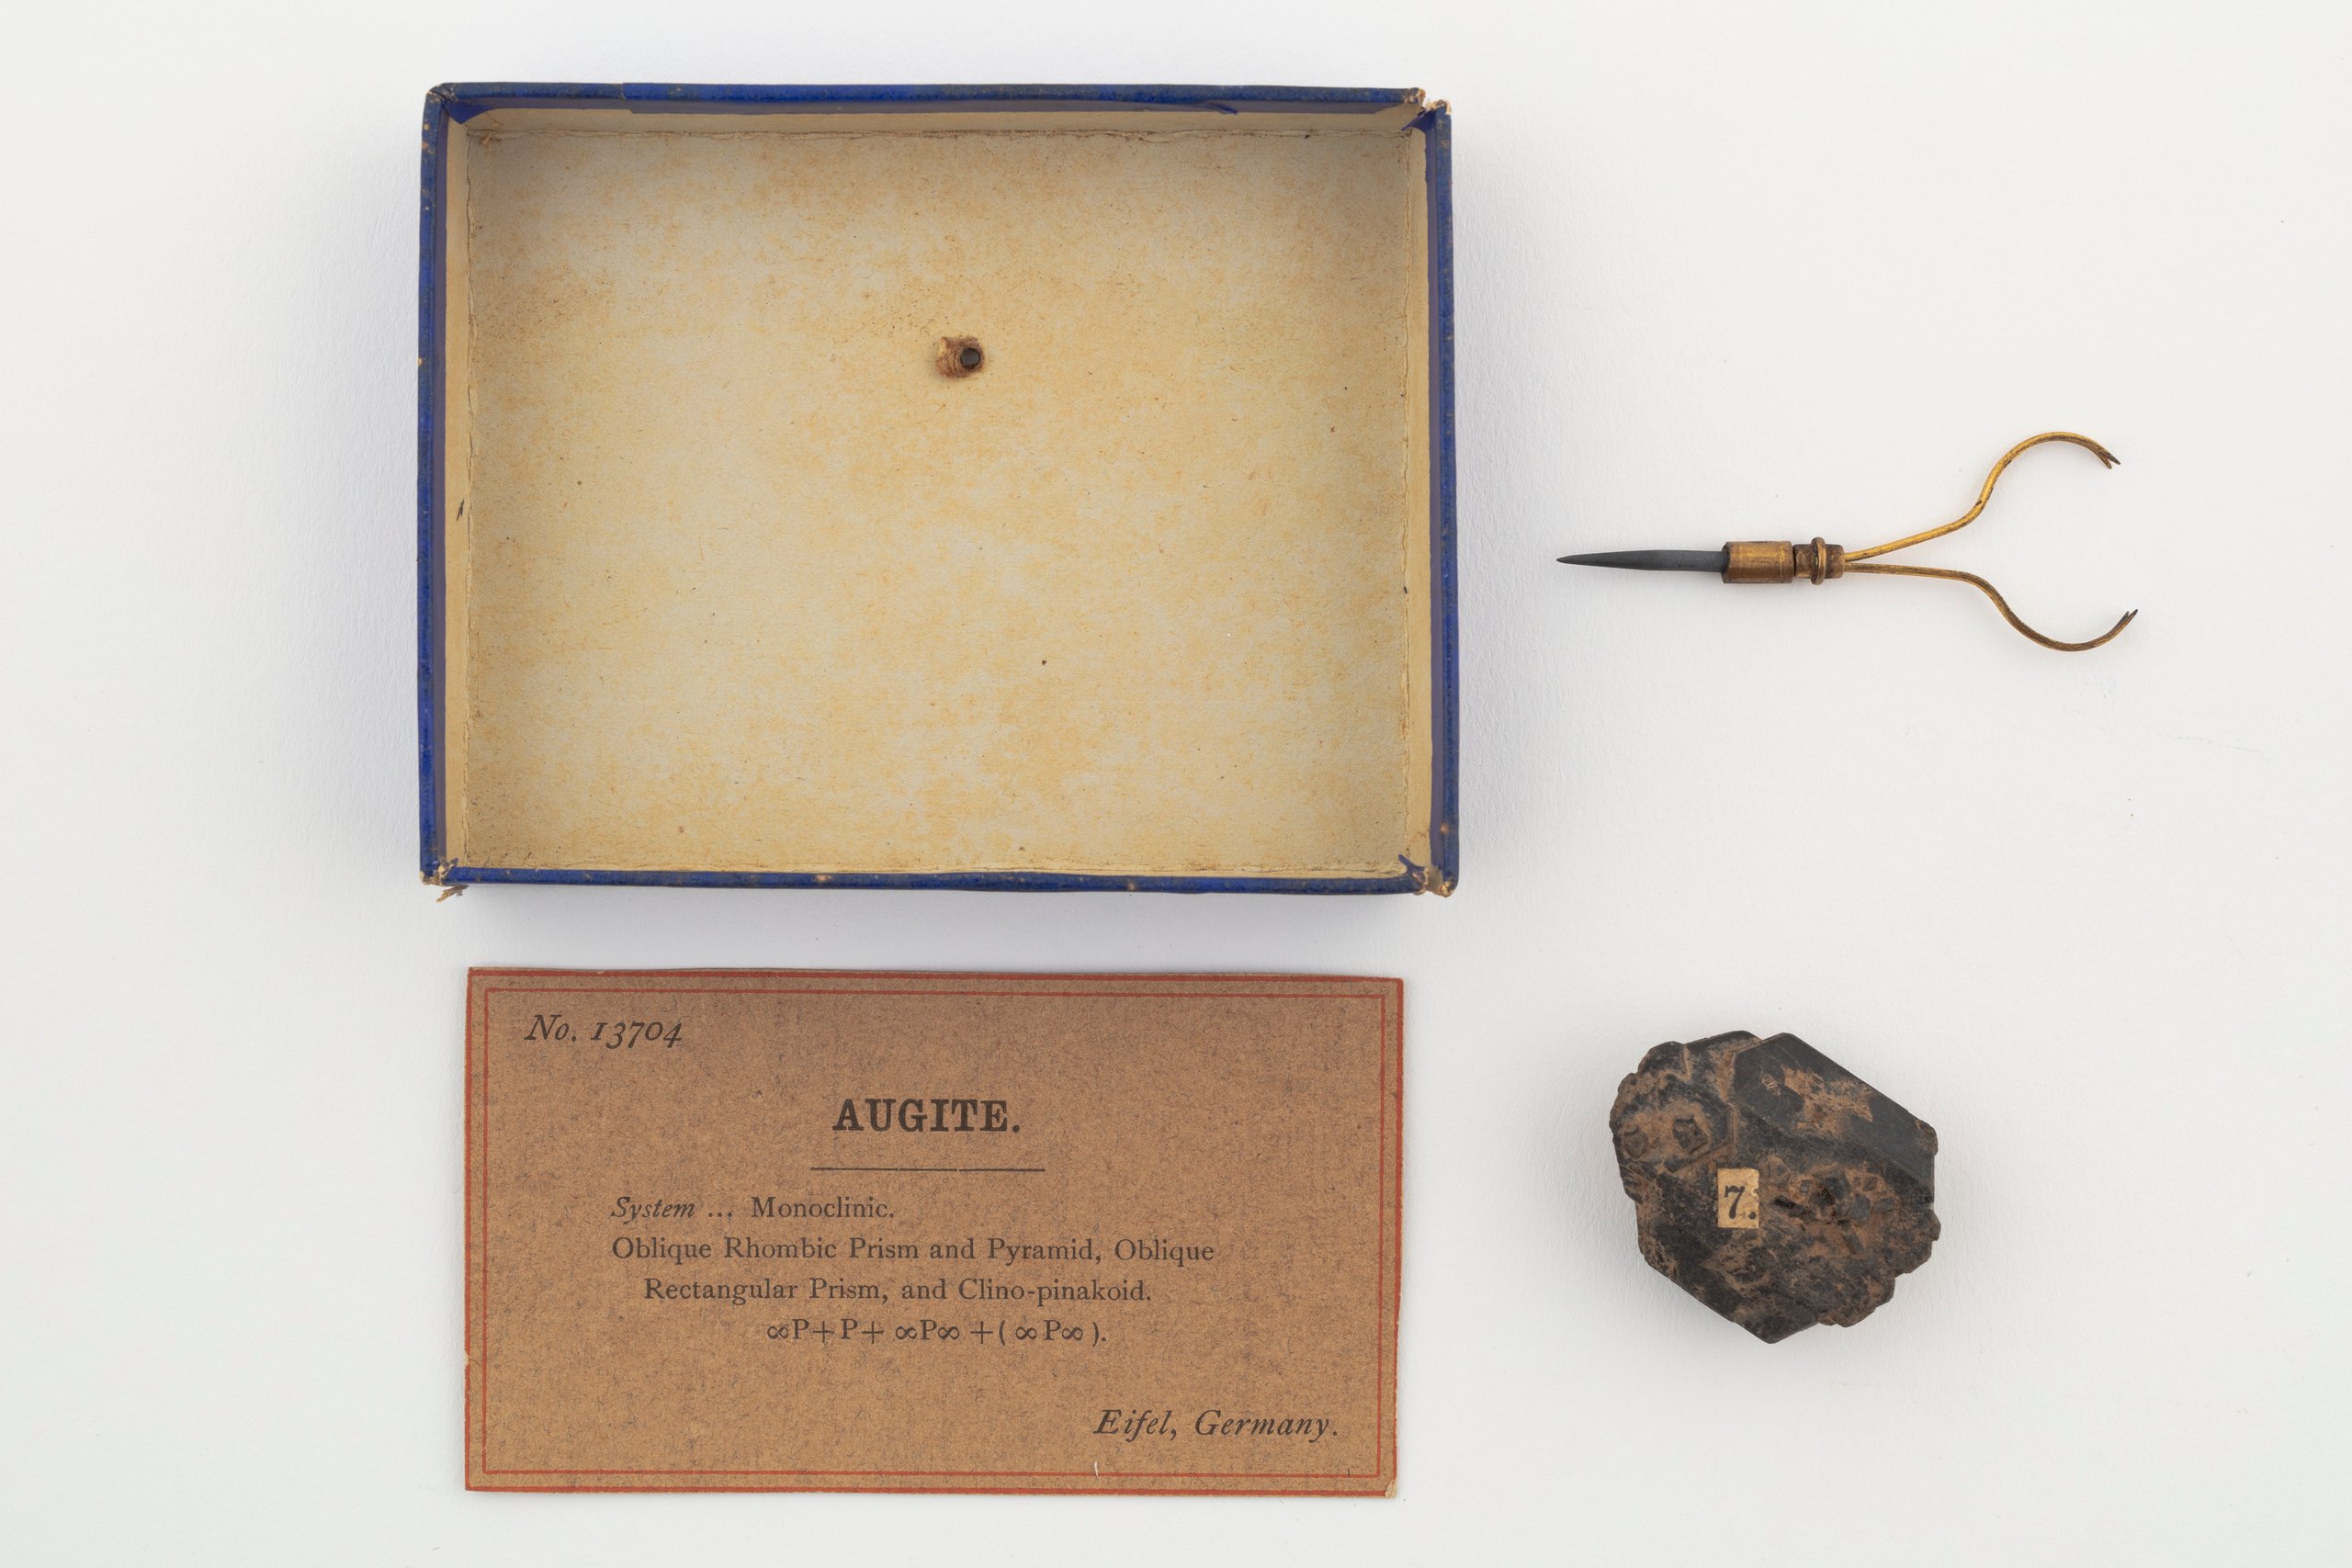 Augite mineral sample and accessories